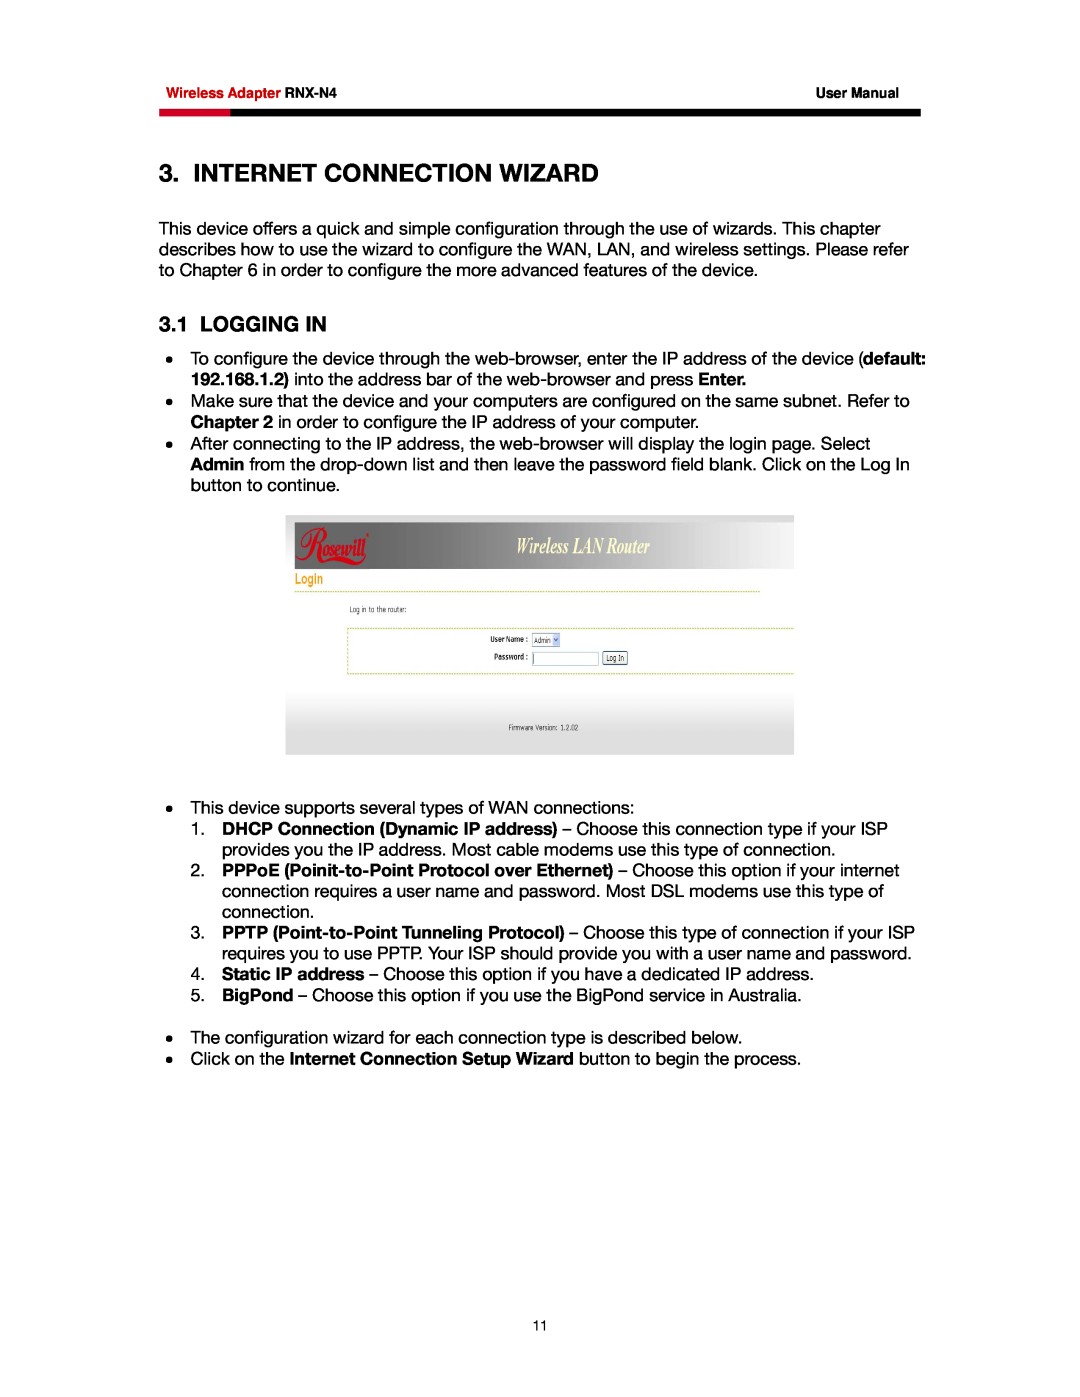 Rosewill RNX-N4 user manual Internet Connection Wizard, Logging In 